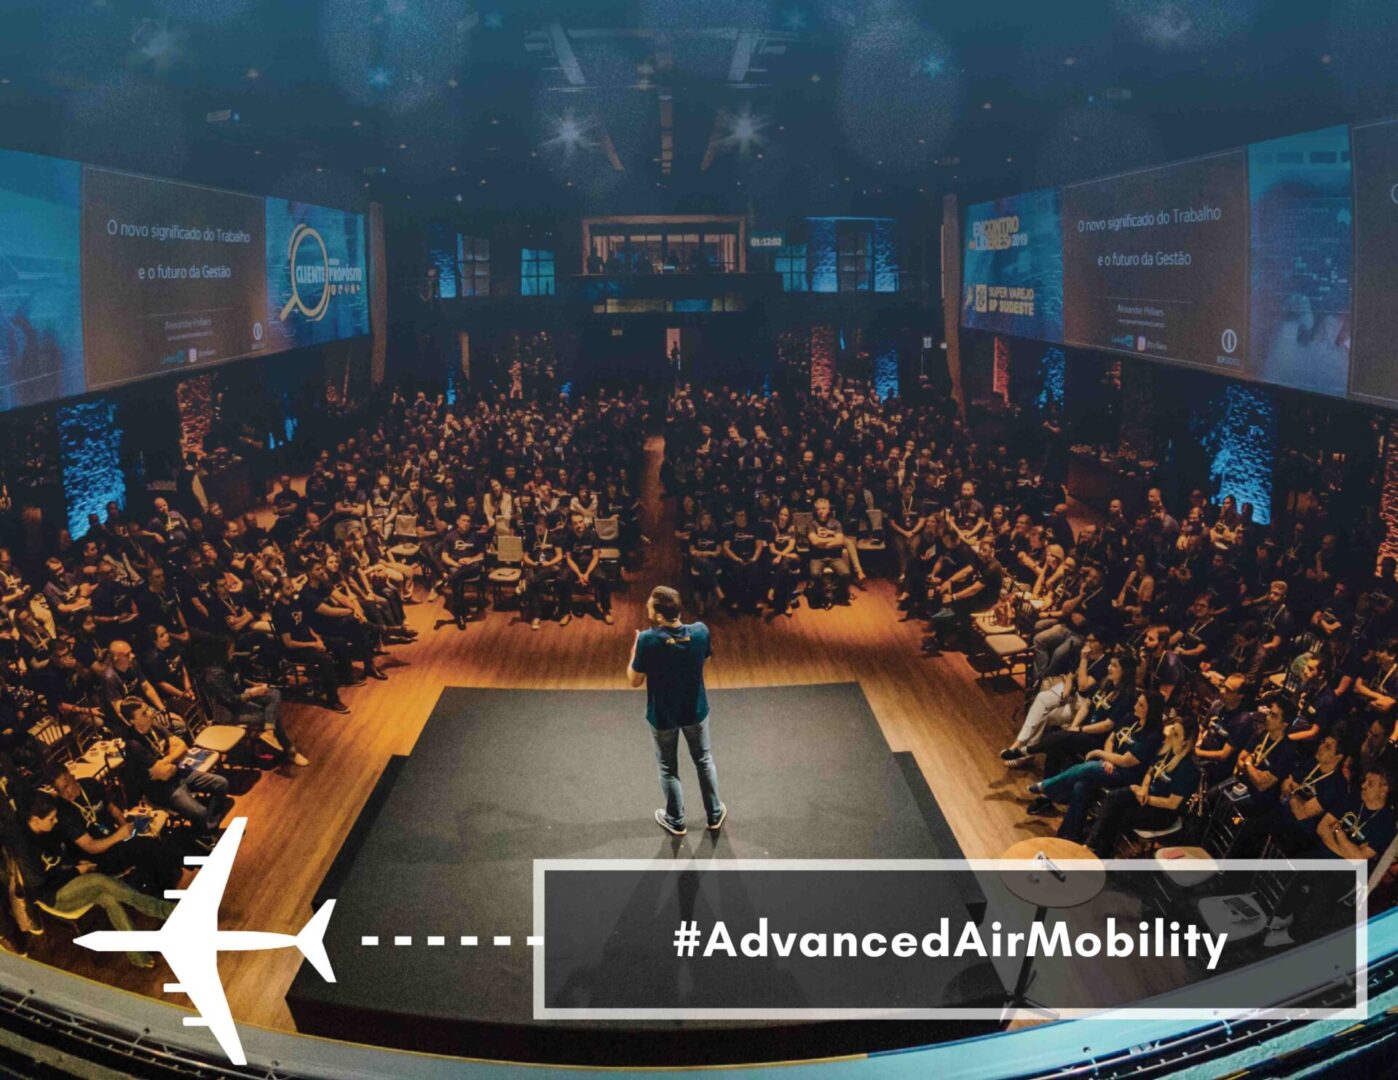 A man is standing on stage at the NDRC Summit in front of an audience with the words advanced air mobility.